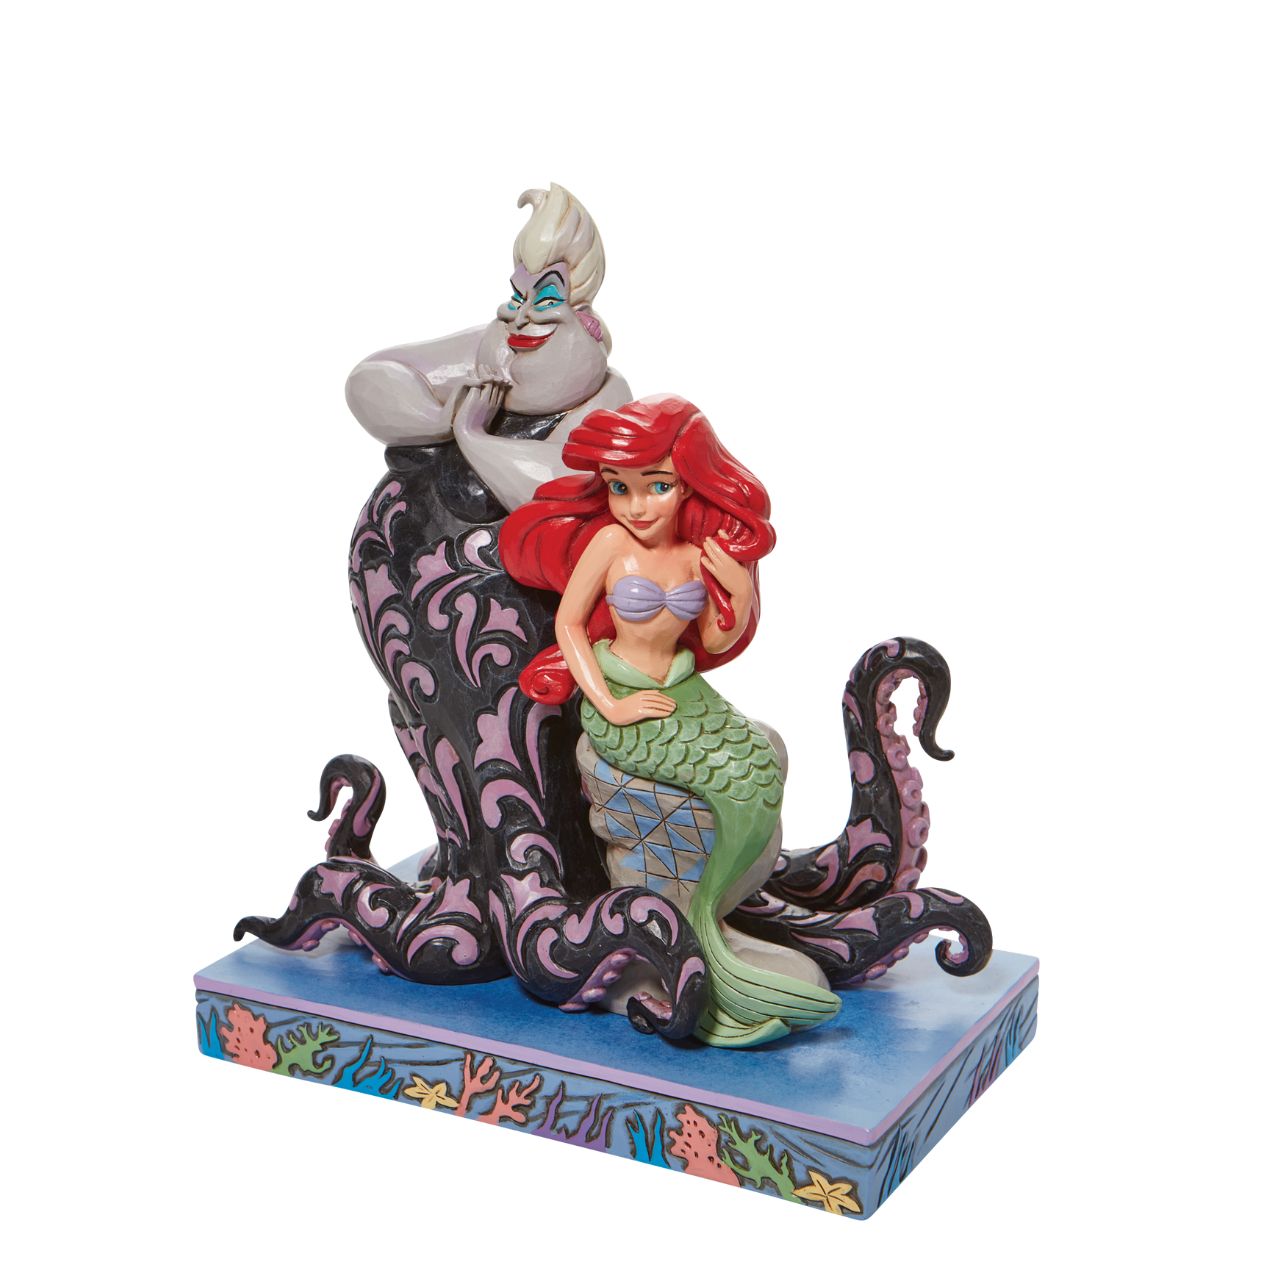 This Jim Shore piece ventures under the sea to share a scene of good and evil. Smiling innocently, Ariel, the little mermaid, sits on a stump as the sea witch, Ursula, connives cruelly behind her shoulder. Packaged in a branded gift box.